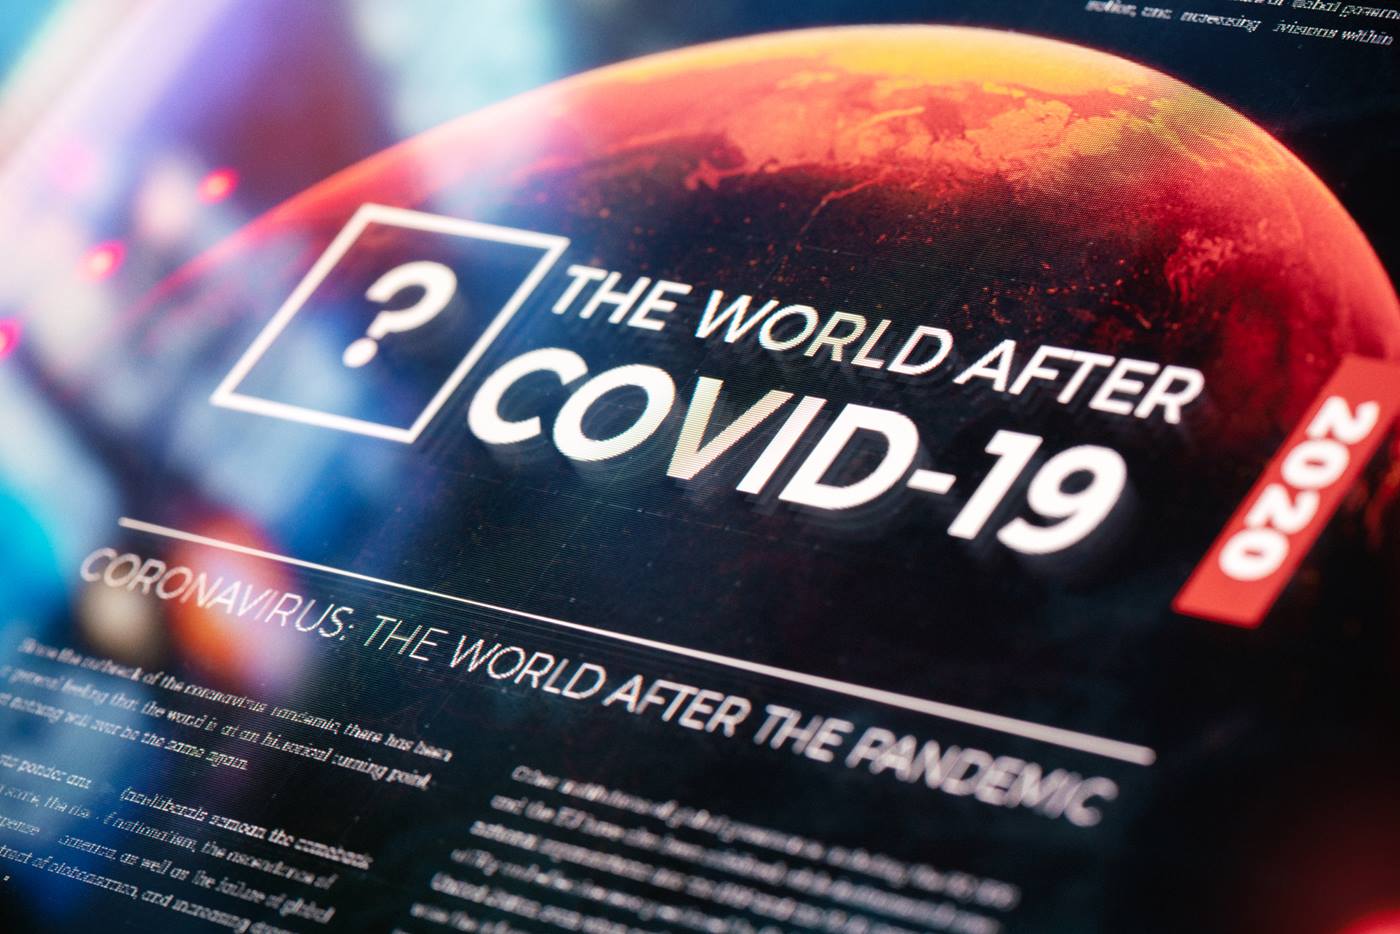 The world after COVID 19 image